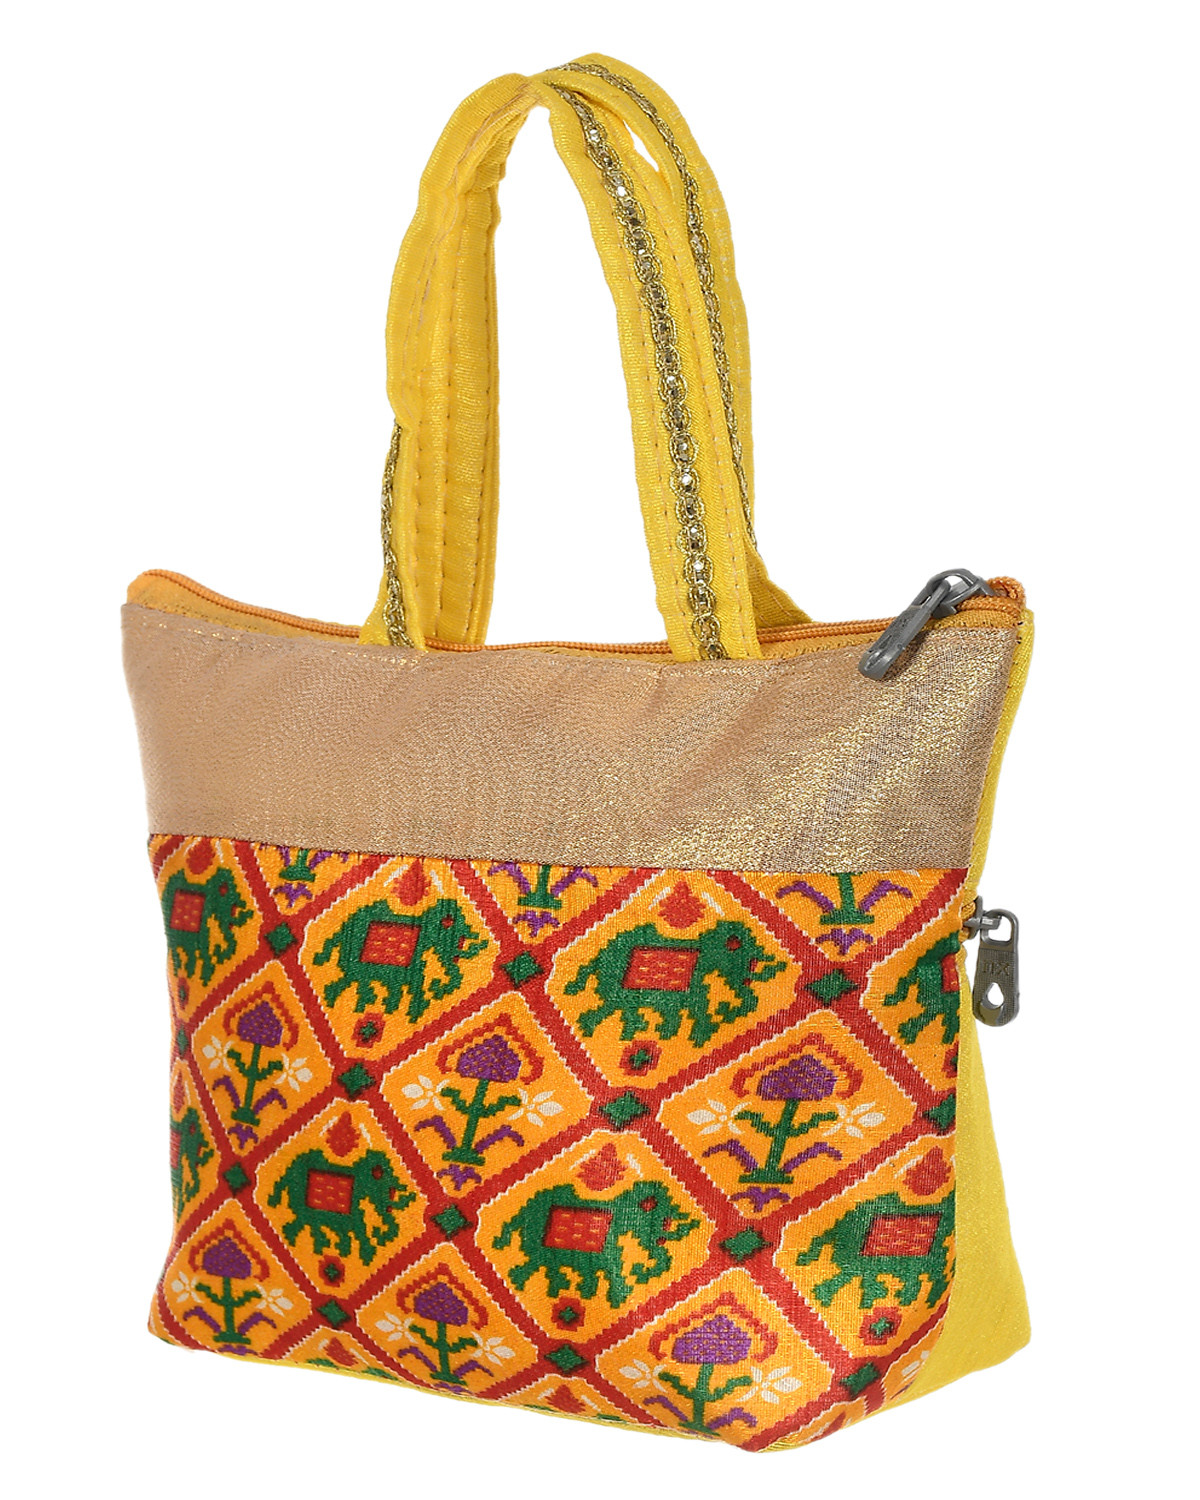 Kuber Industries Polyester Elephant Print Hand Bag For Women/Girls With Handle (Yellow) 54KM4035